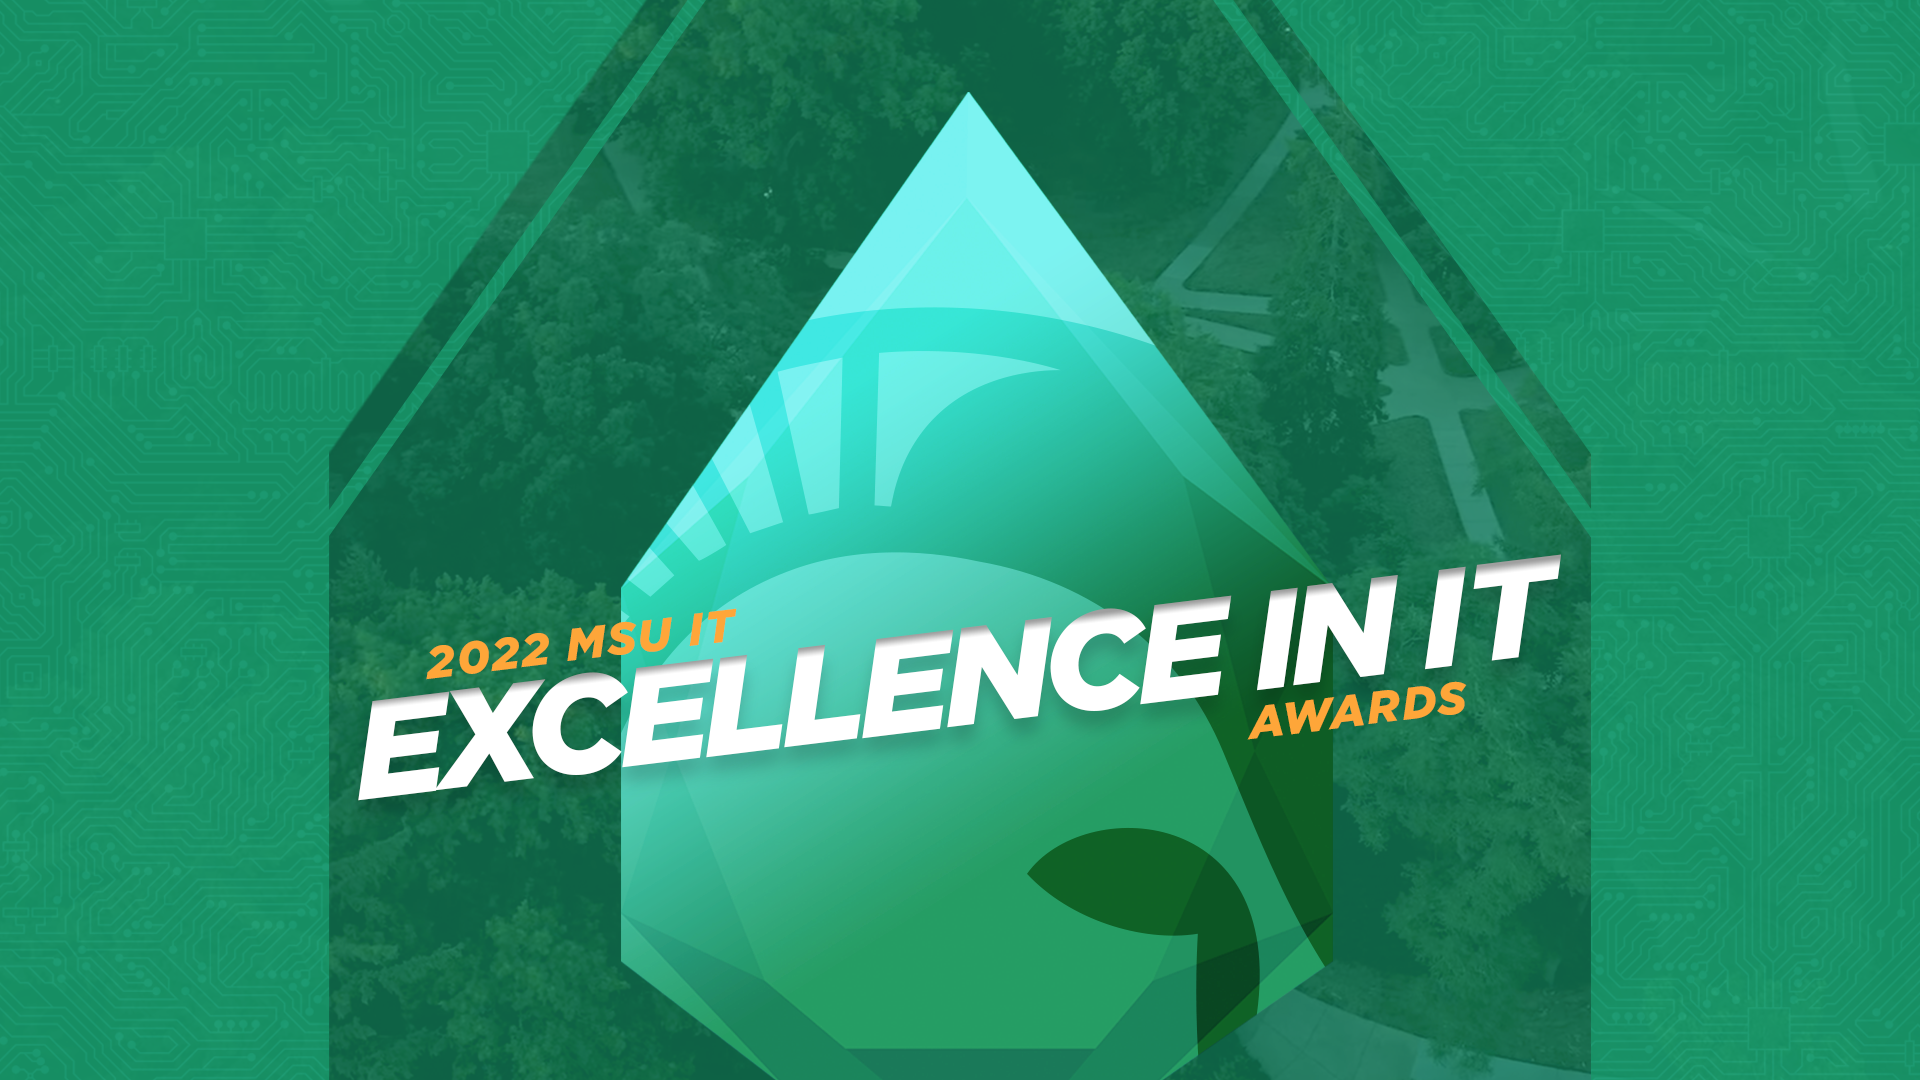 Excellence in IT Awards logo